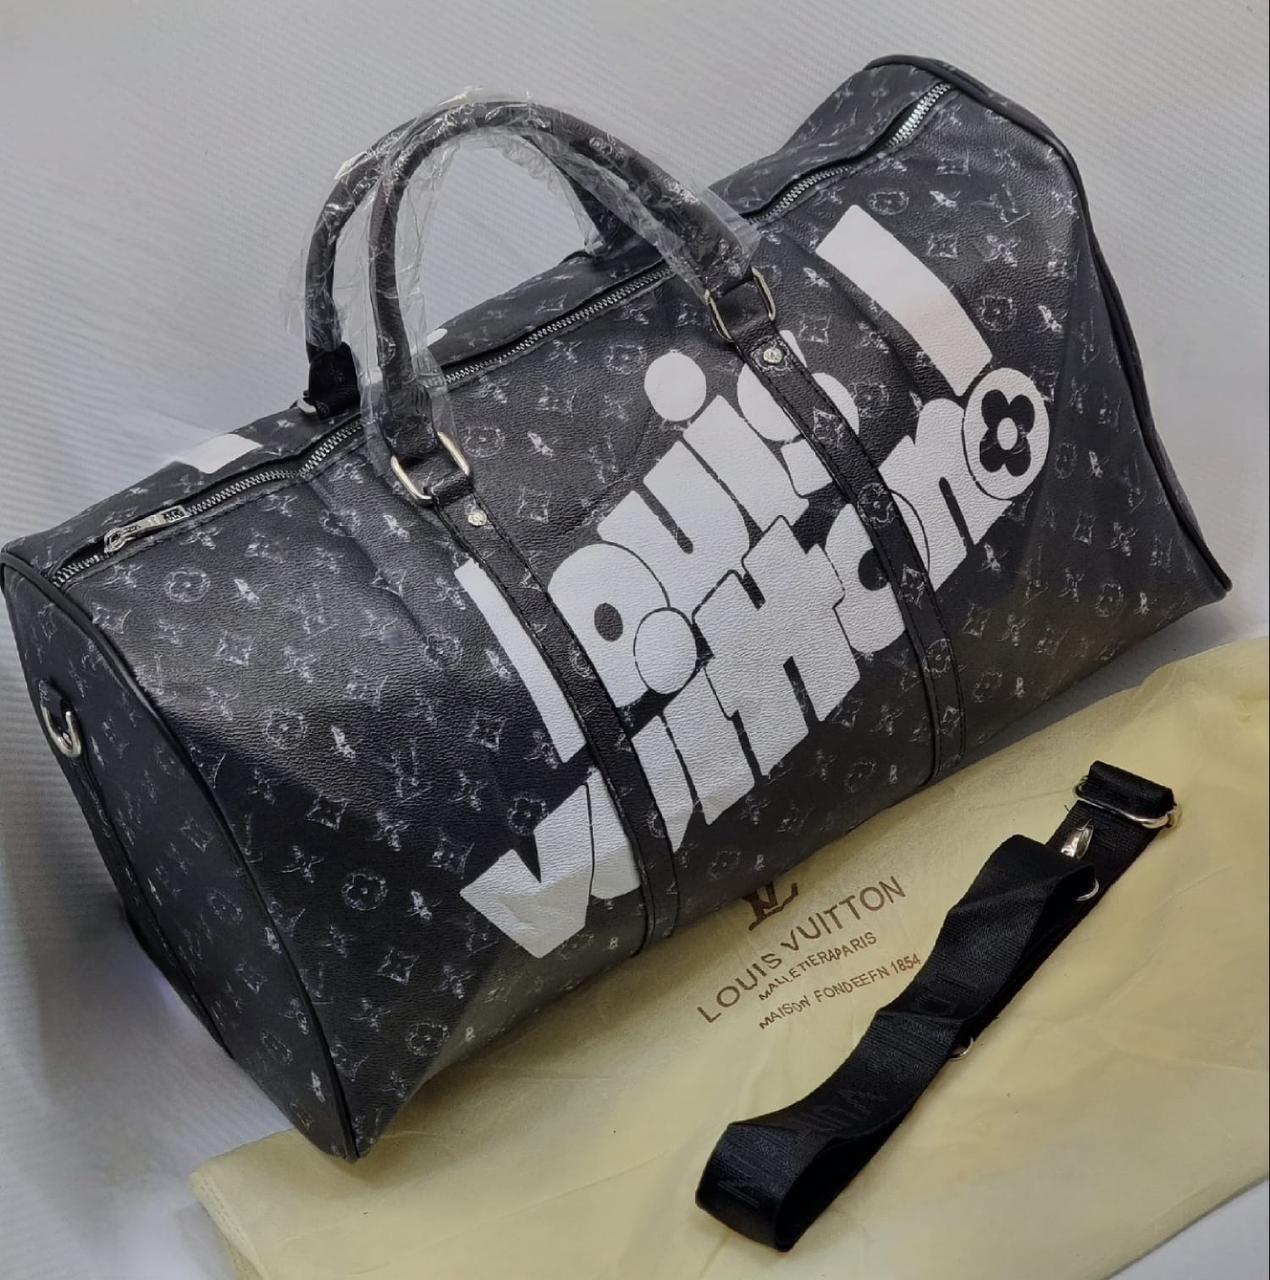 Louis Vuitton Duffel Bag: A Collaboration of Iconic Brands